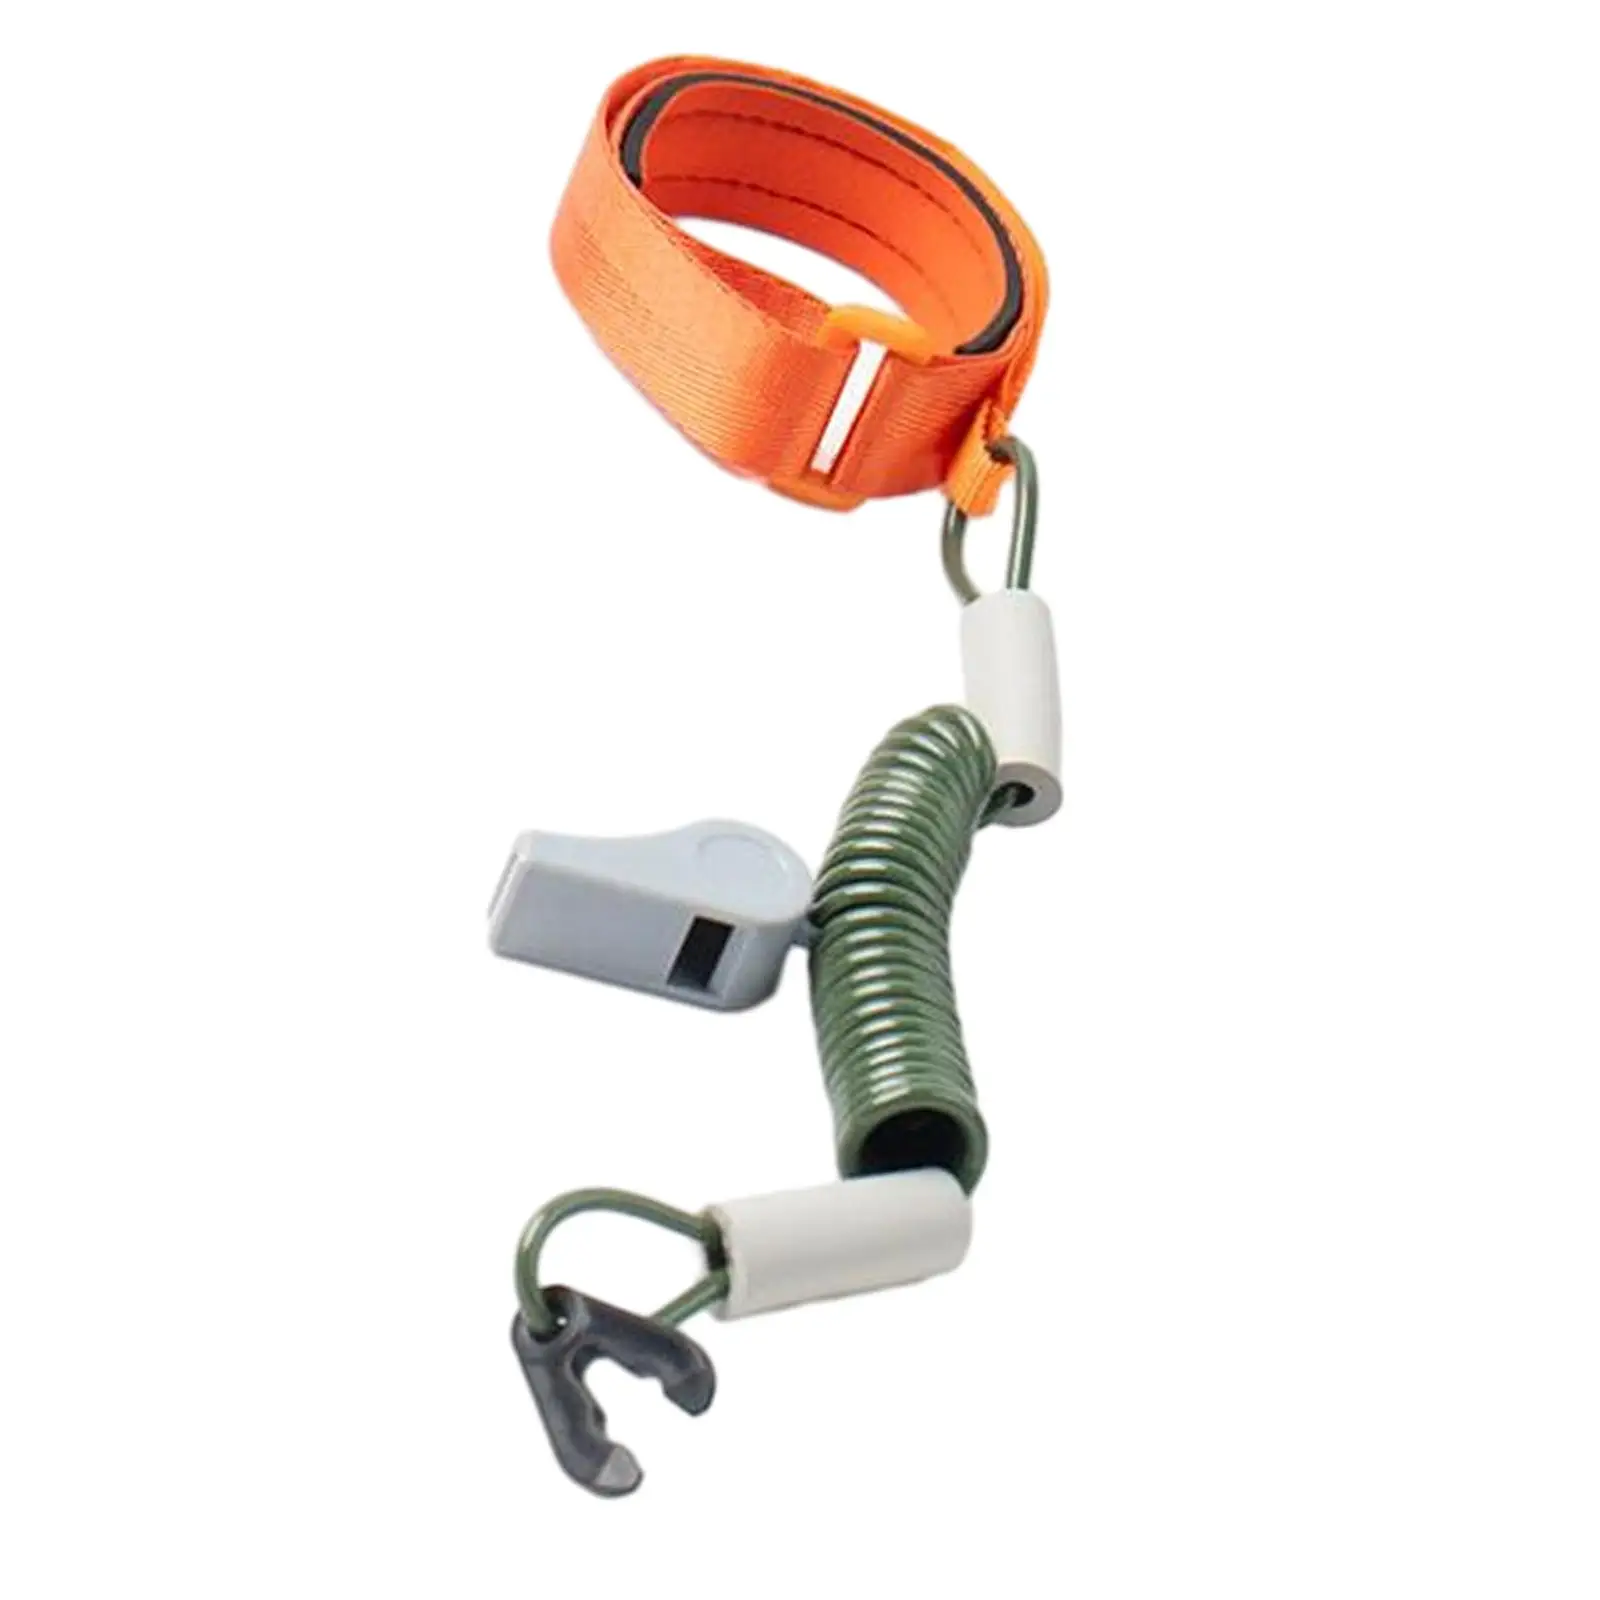 Safety Kill Stop Switch Lanyard with Key Whistle Accessories Multifunctional